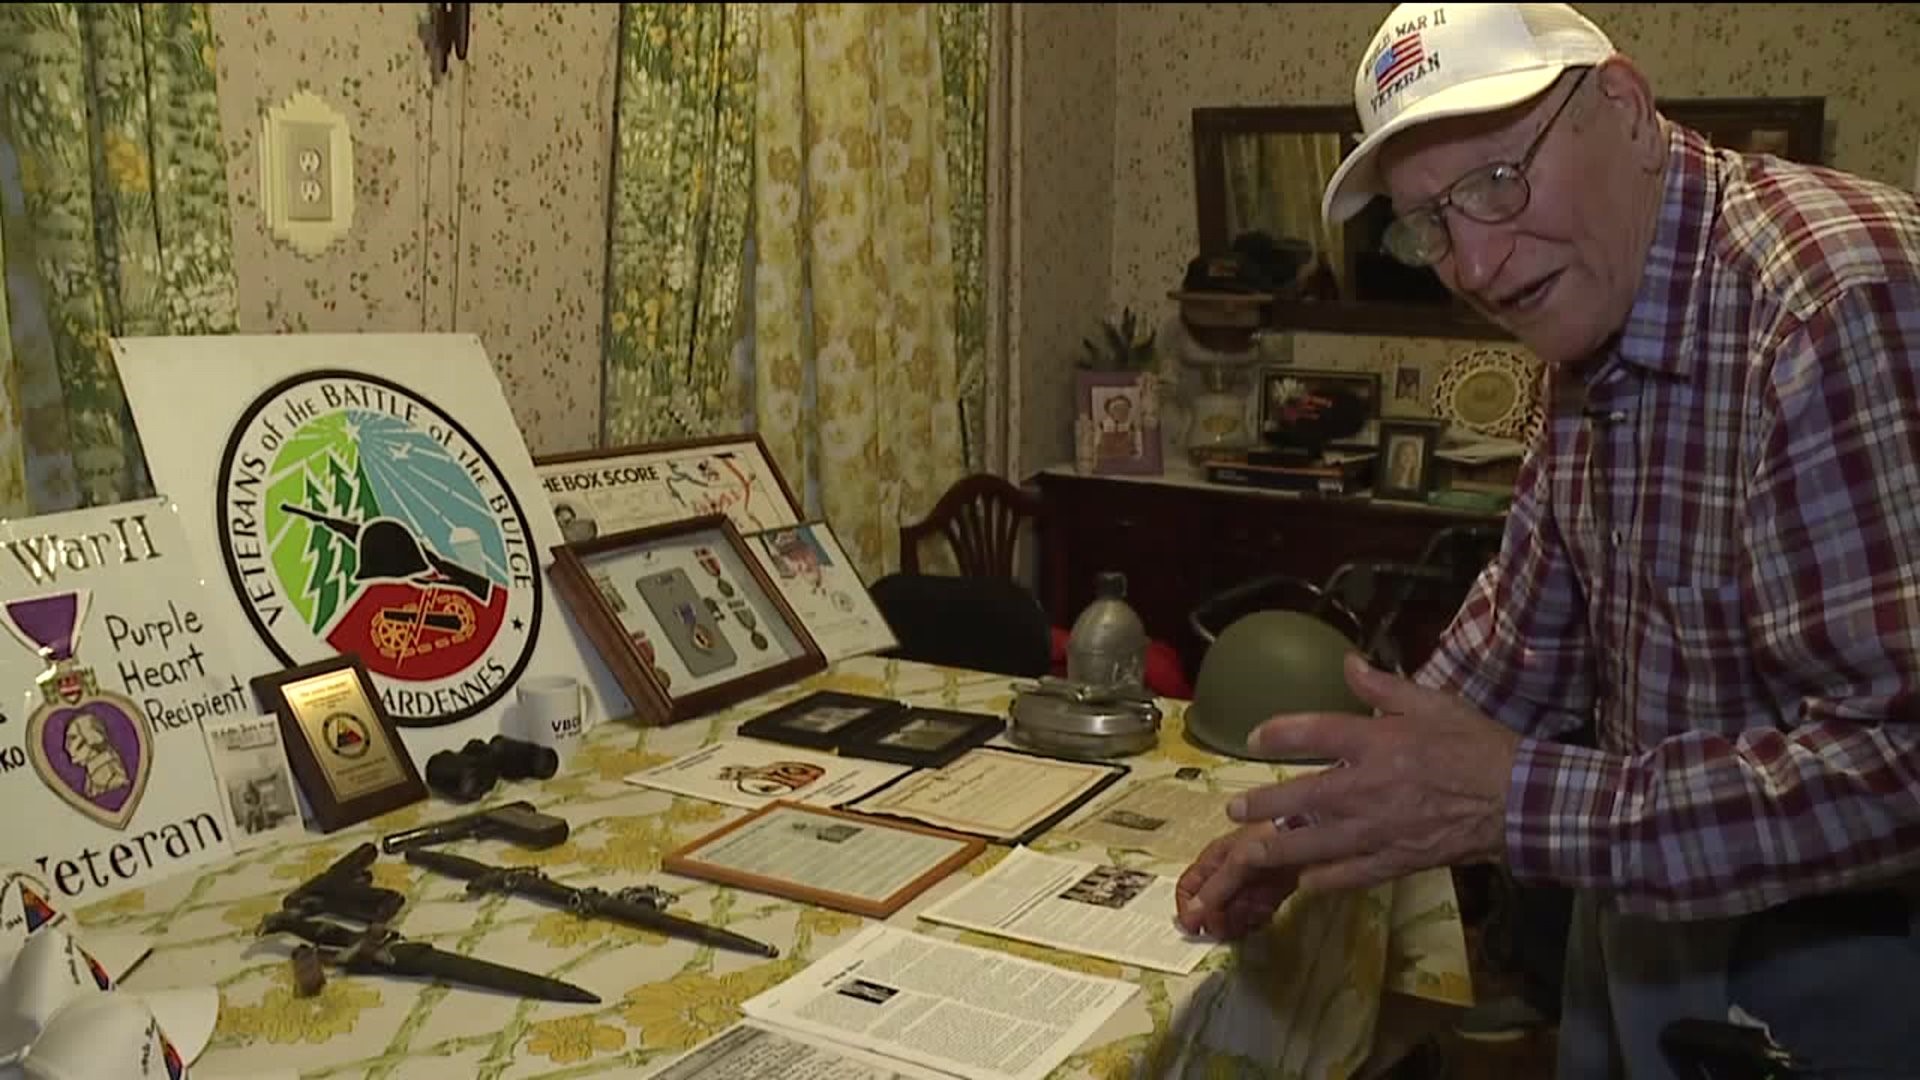 WWII Veteran Recalls Fighting in Europe on the 75th Anniversary of D-Day